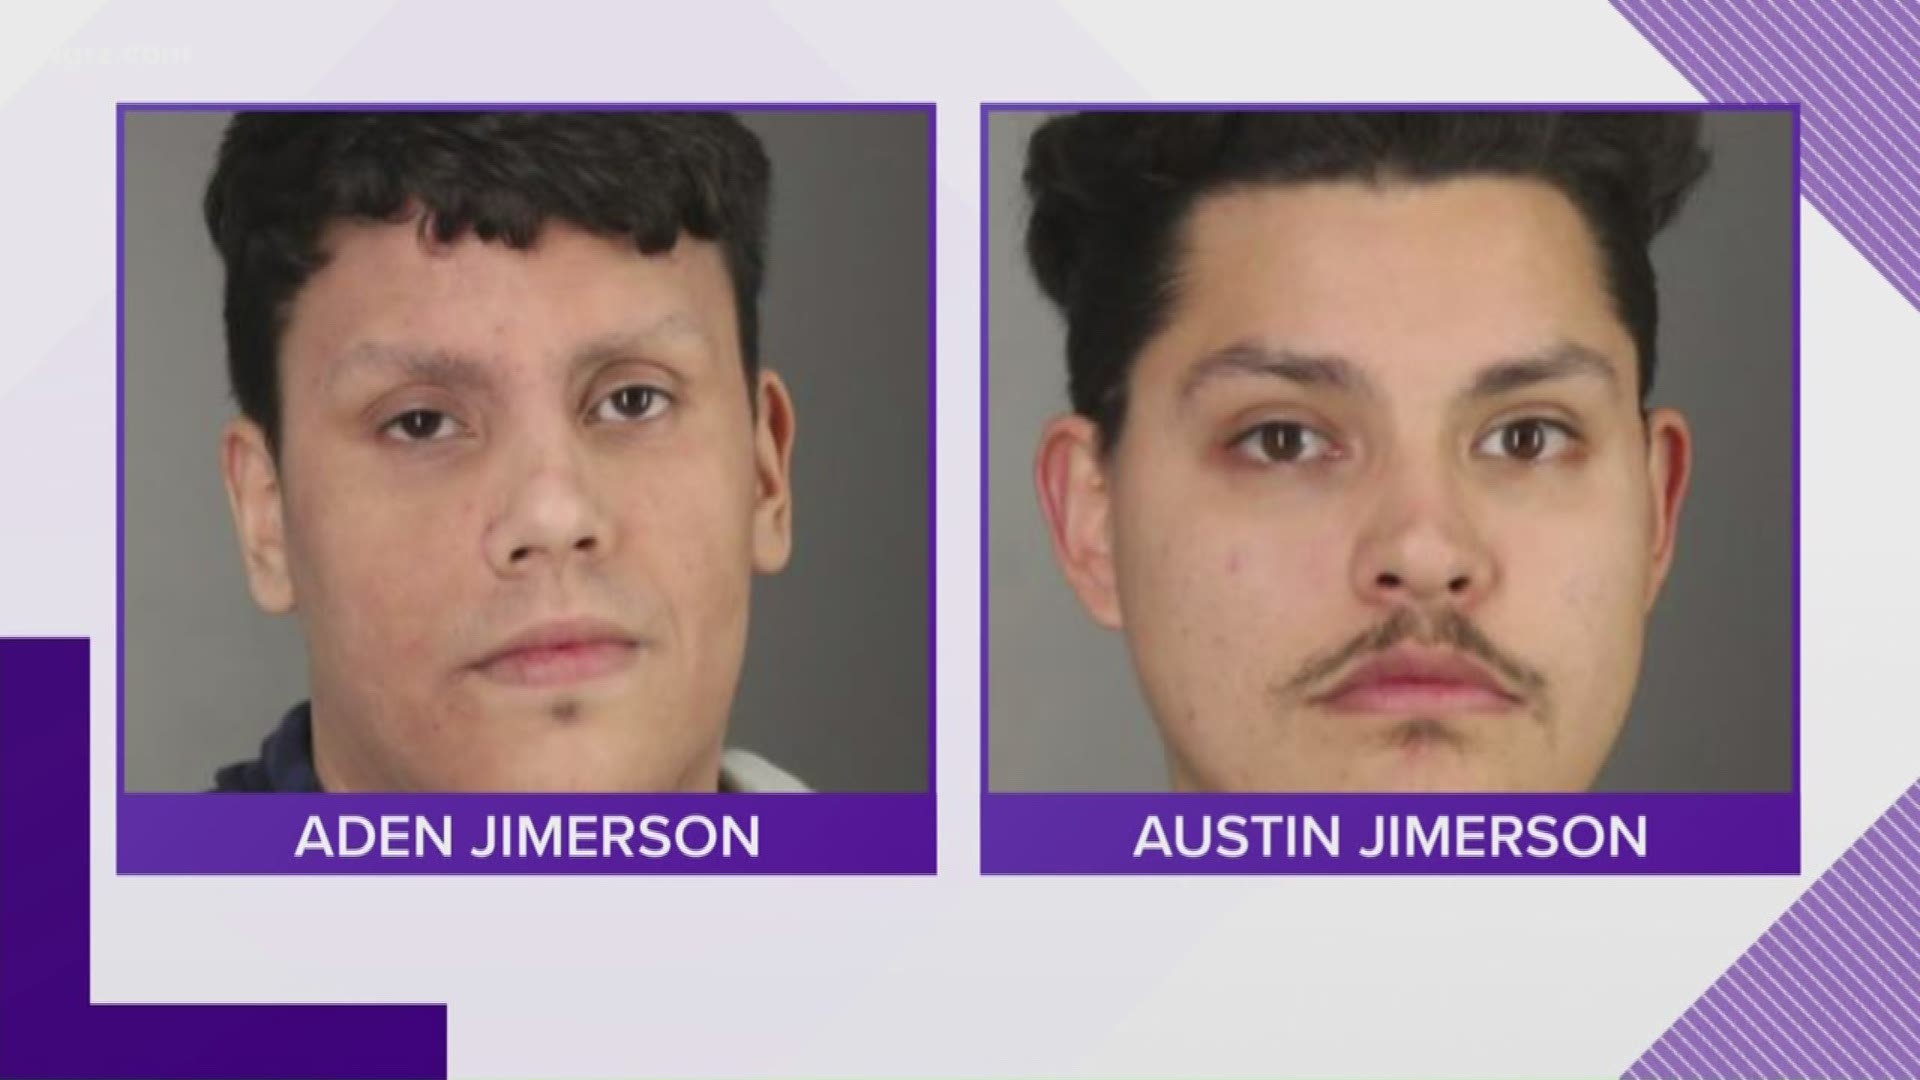 people told police they spotteed two men walking down the road carrying dead chickens... they found Aden and Austin Jimerson and arrested them.